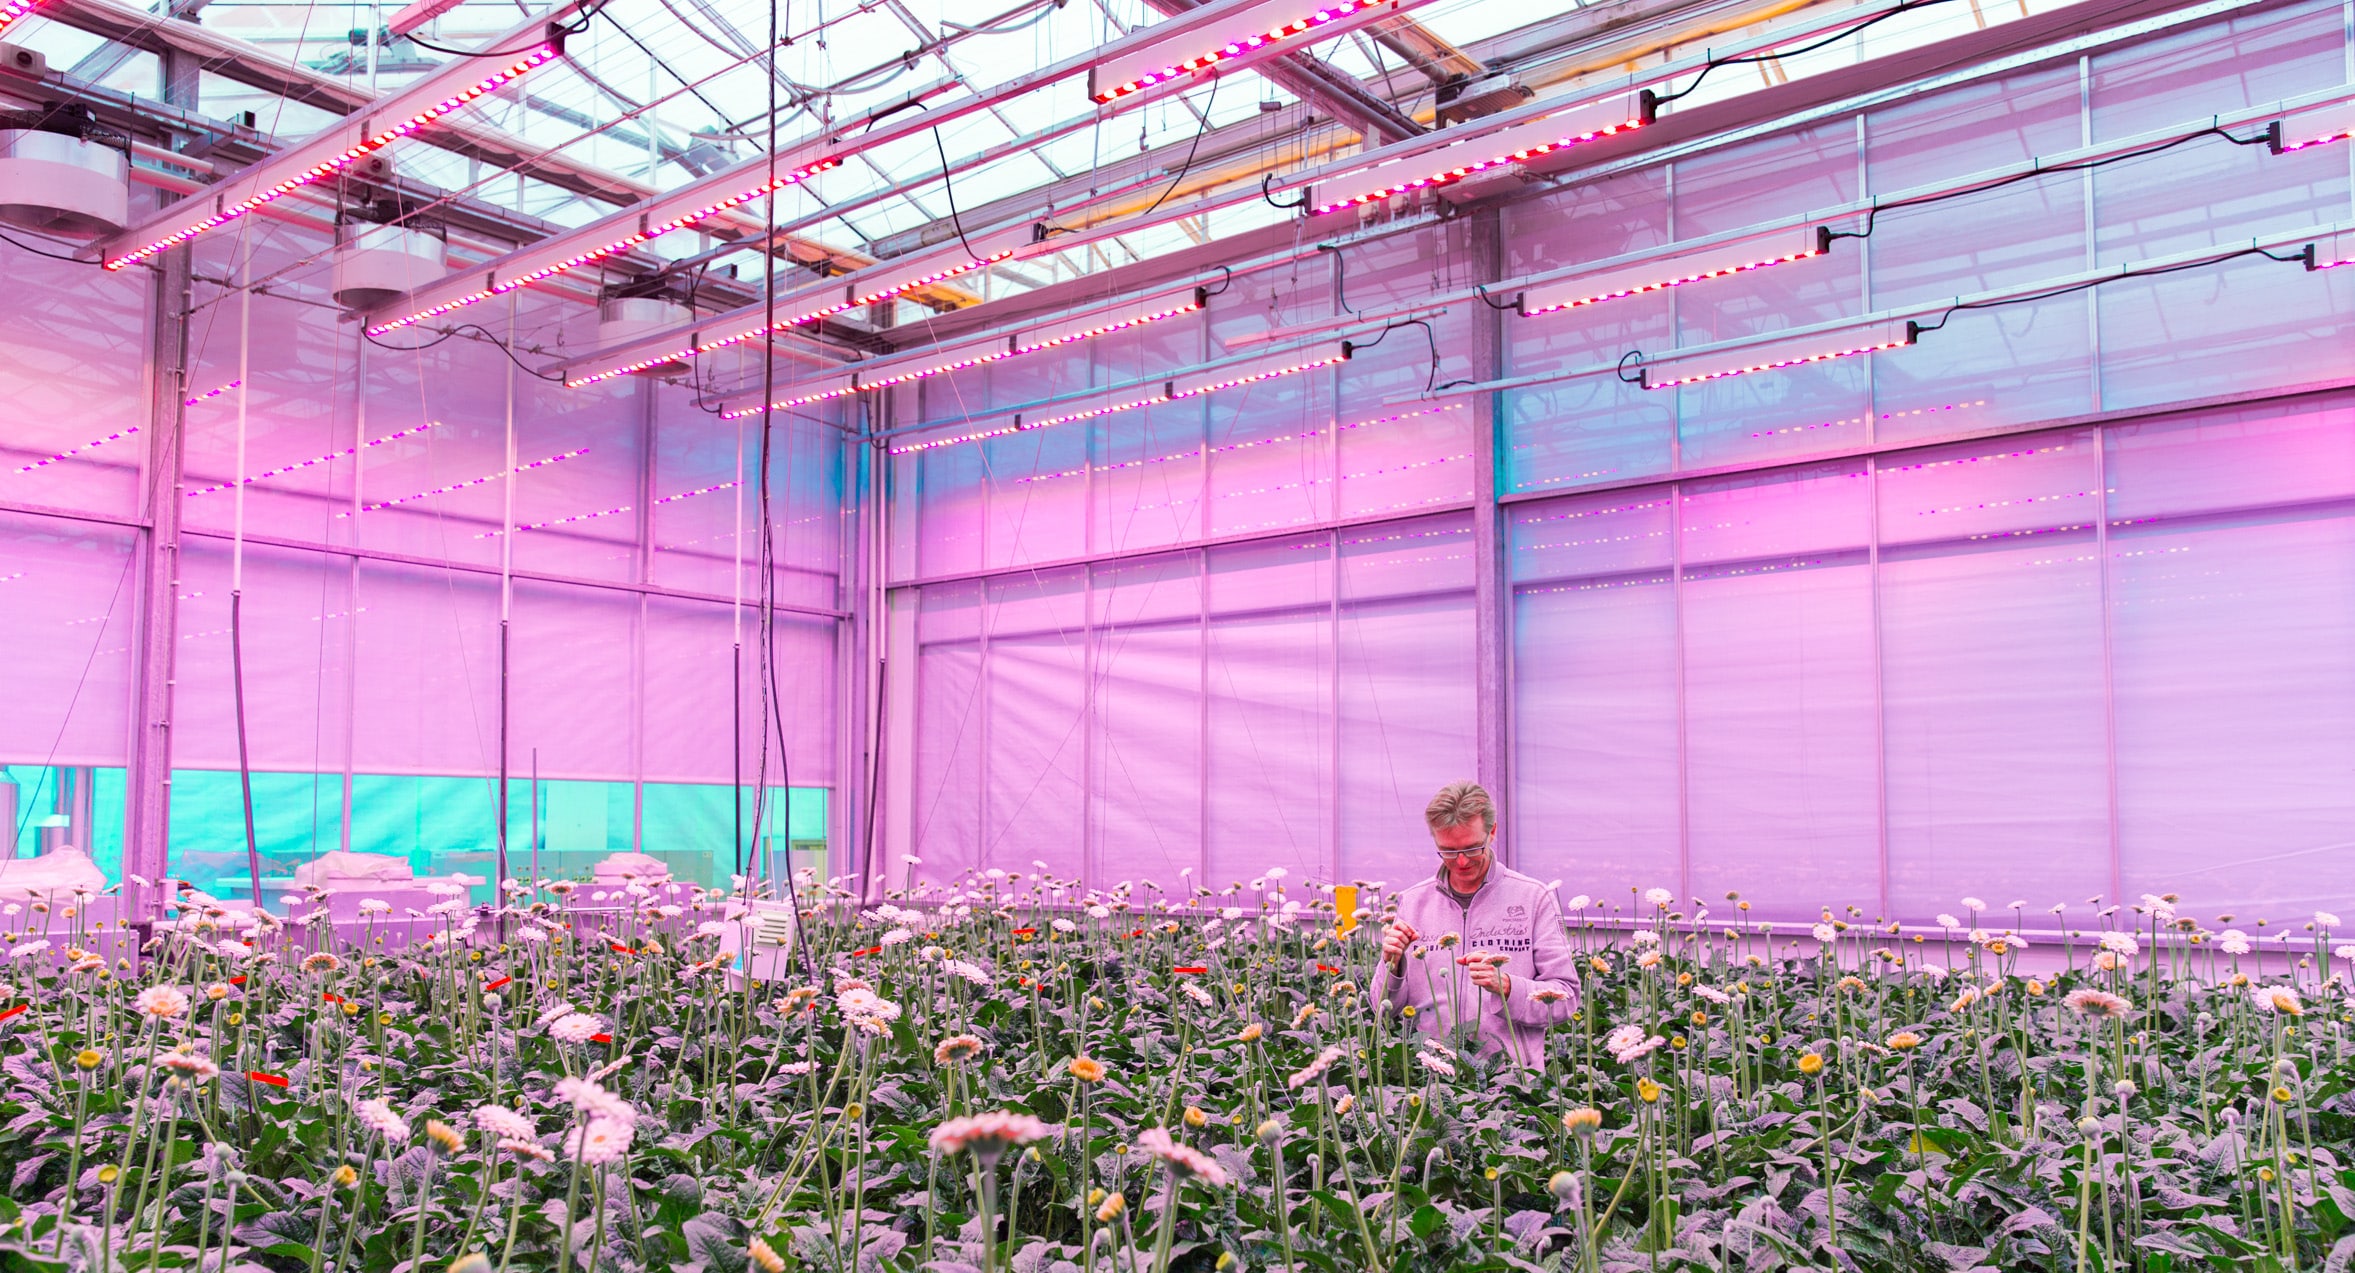 Several trials using different light strategies to grow gerbera crops were done by researchers at Wageningen UR in Bleiswijk, The Netherlands.